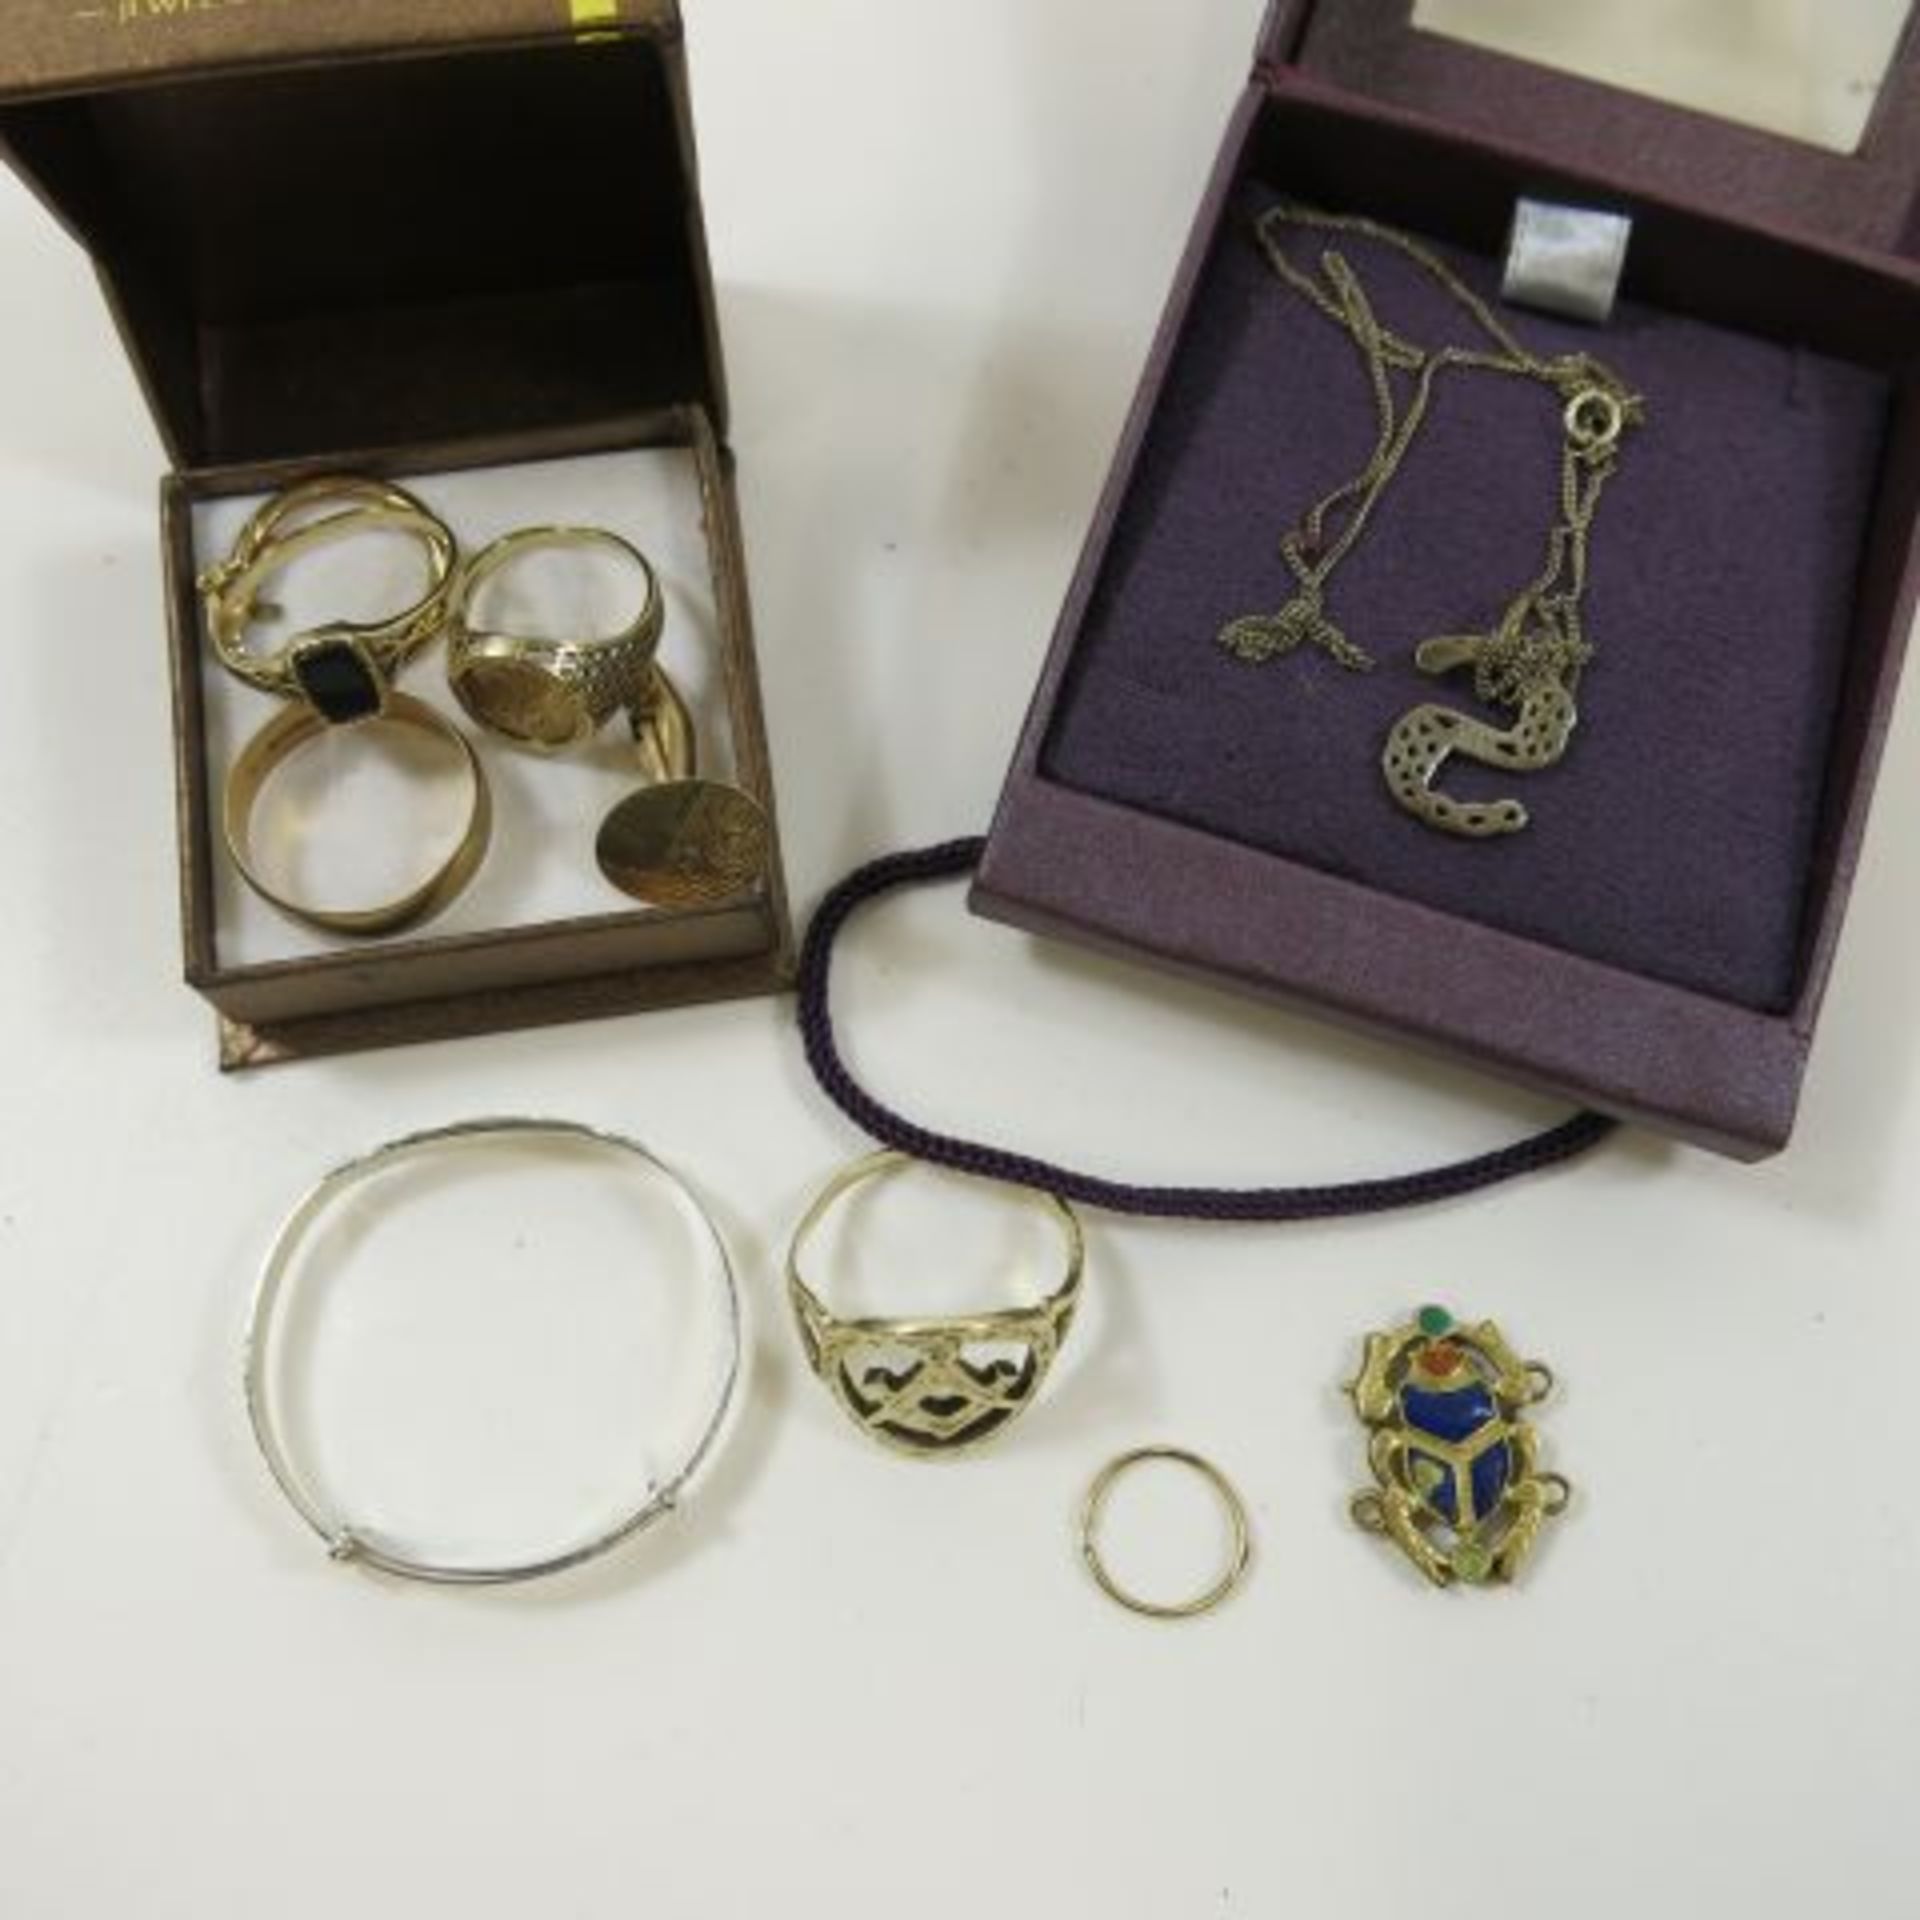 3 x 9 Carat Gold Rings and single Cufflinks (6.8g), Unmarked (possibly Gold) Masonic Ring, - Image 2 of 2